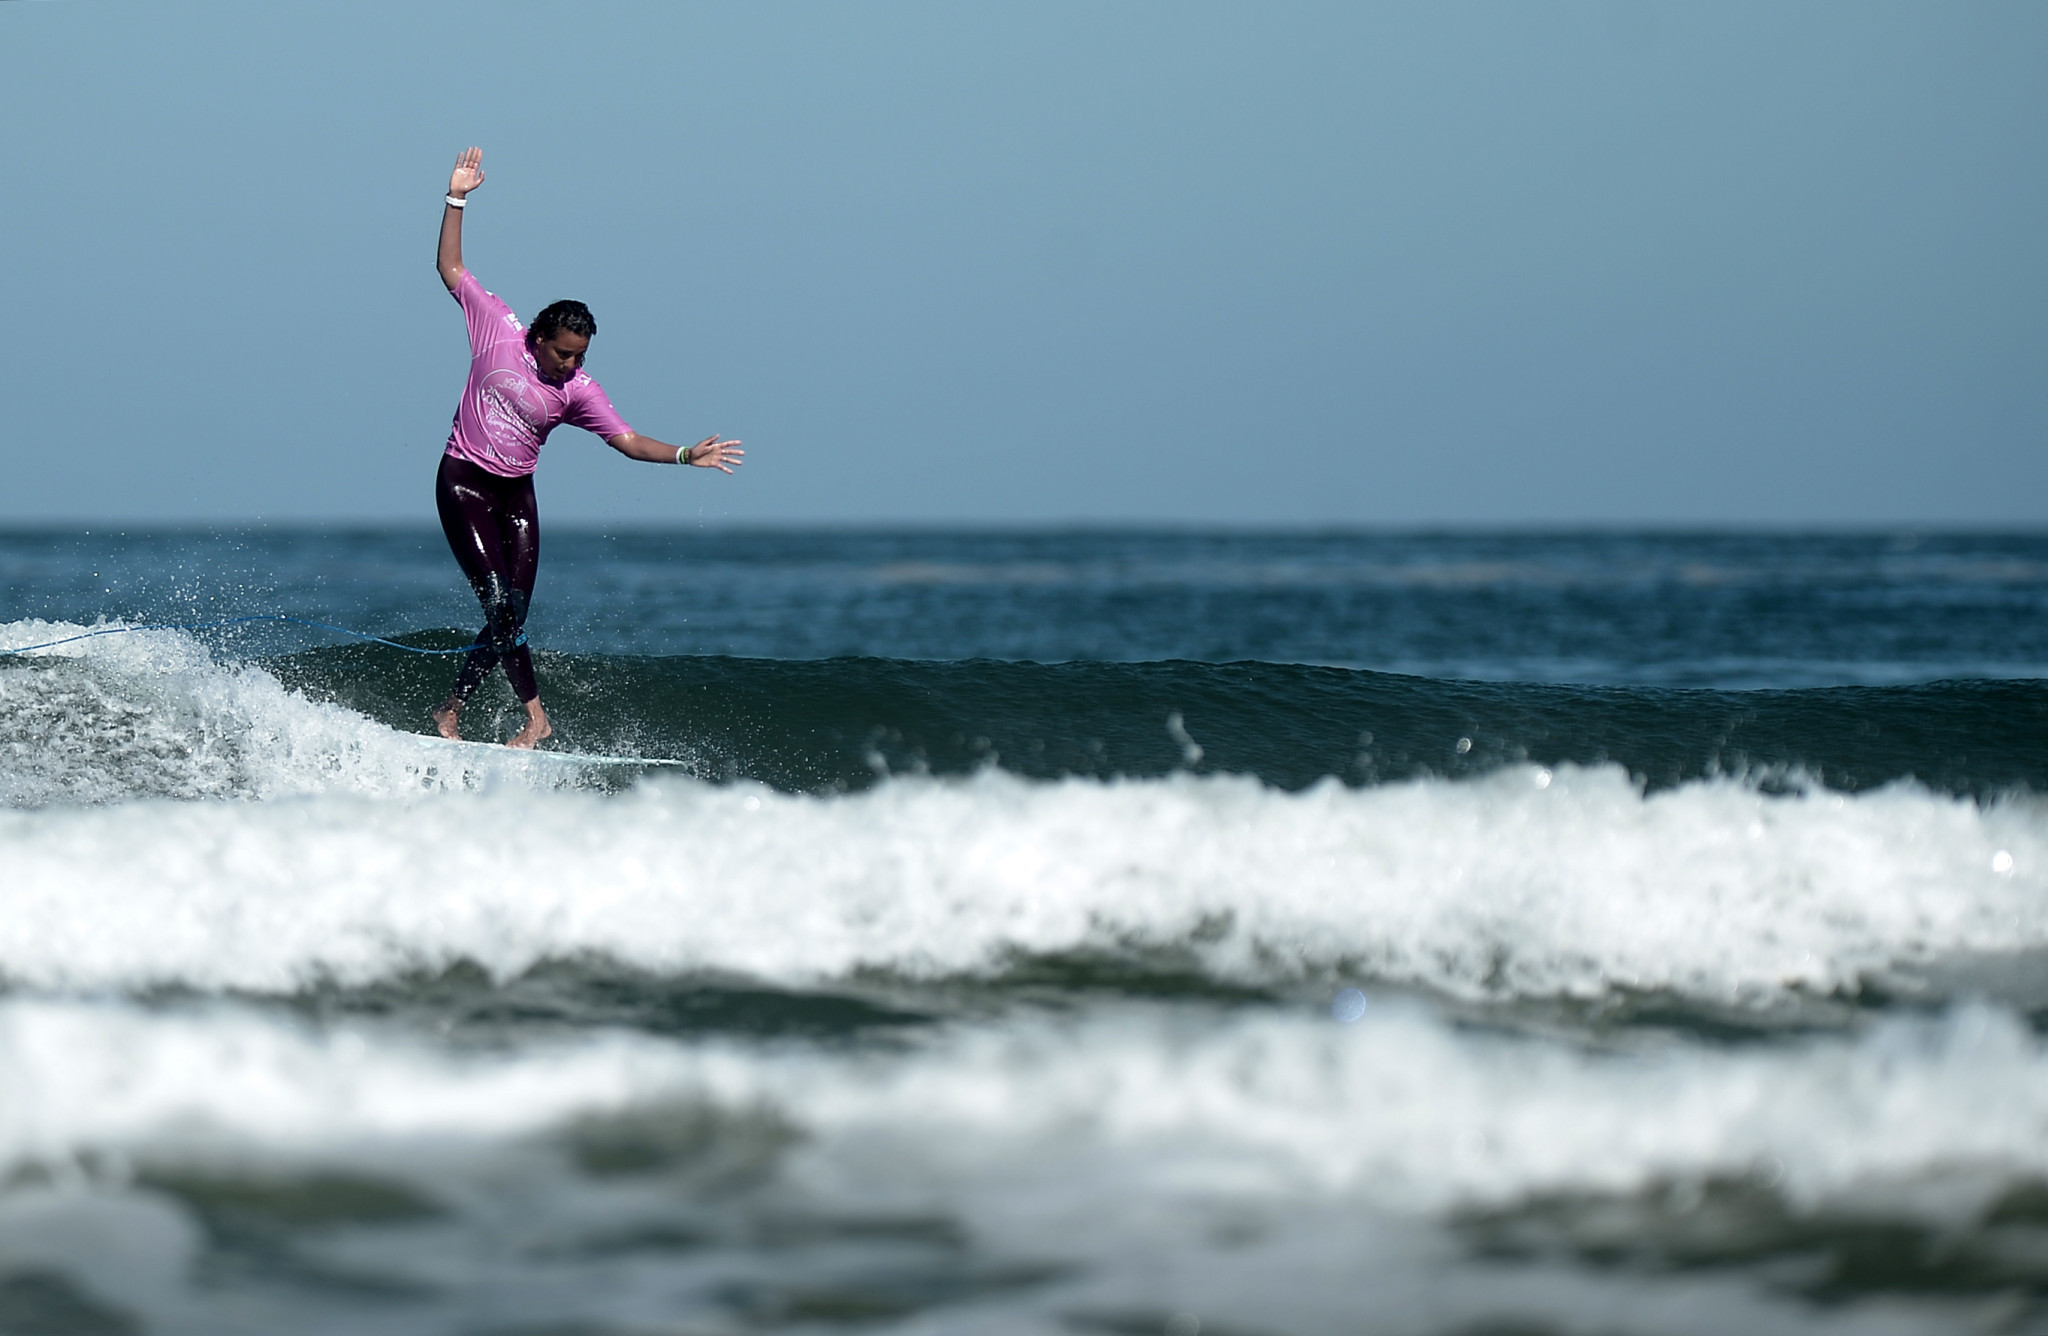 The ISA World Surfing Games in El Salvador were due to have taken place this month, but were postponed indefinitely due to the pandemic ©Getty Images